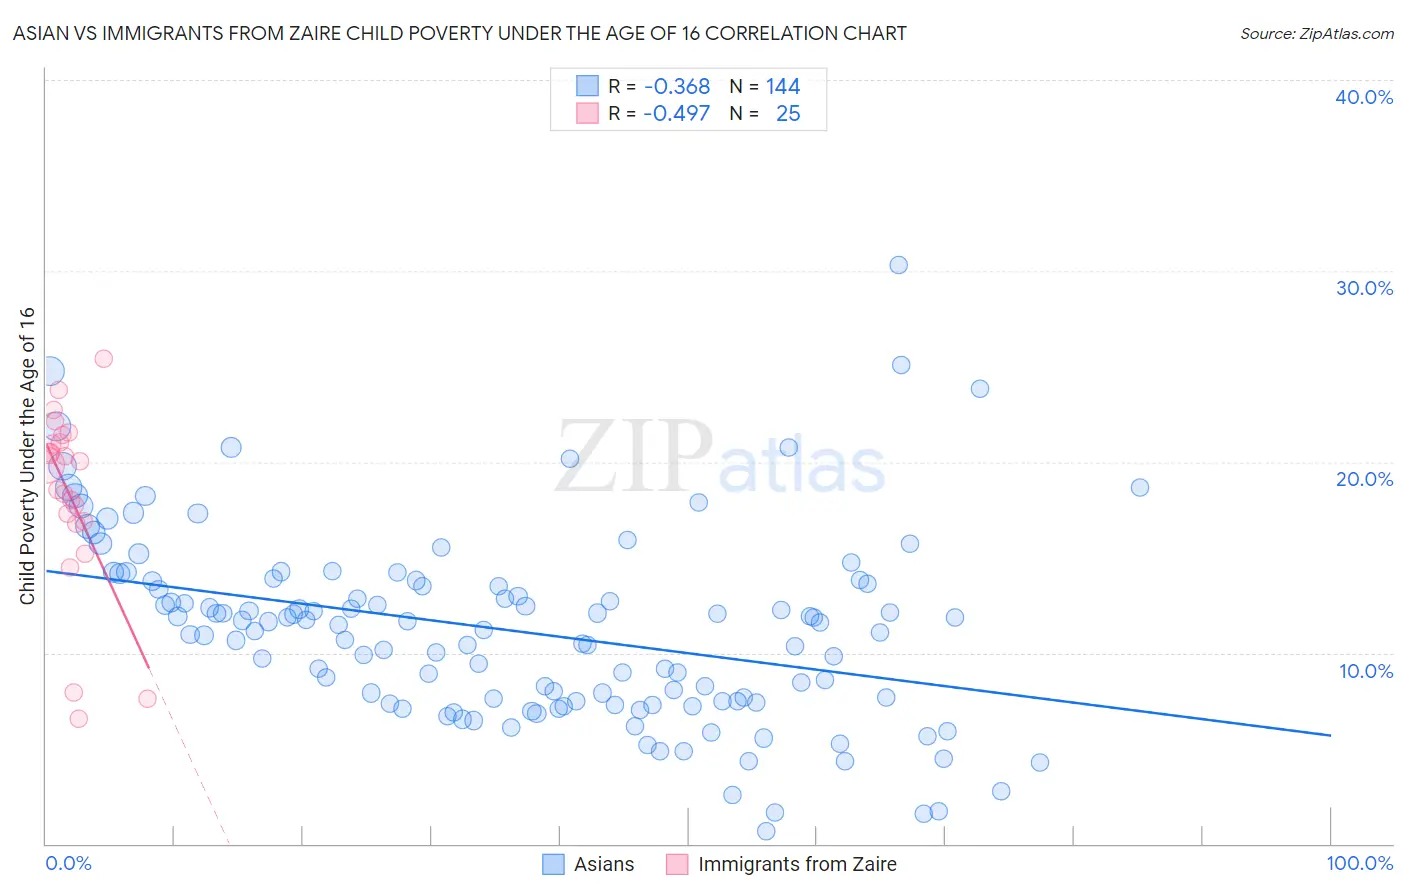 Asian vs Immigrants from Zaire Child Poverty Under the Age of 16